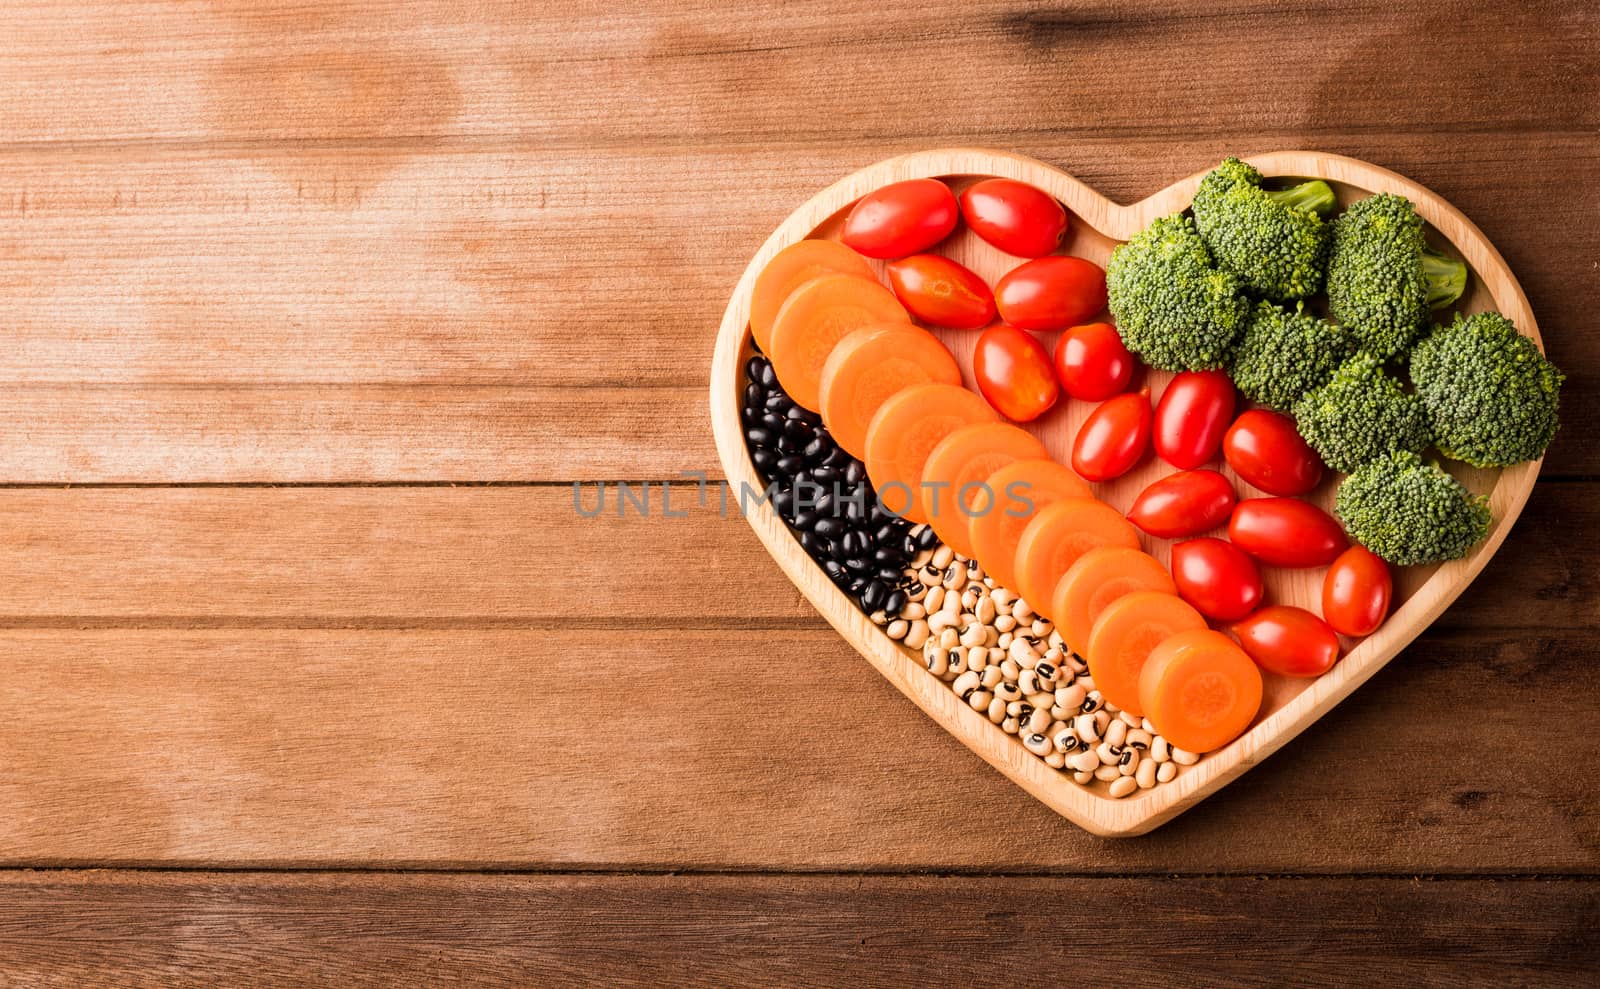 Top view of fresh organic fruits and vegetables in heart plate wood (carrot, Broccoli, tomato) on wooden table, Healthy lifestyle diet food concept